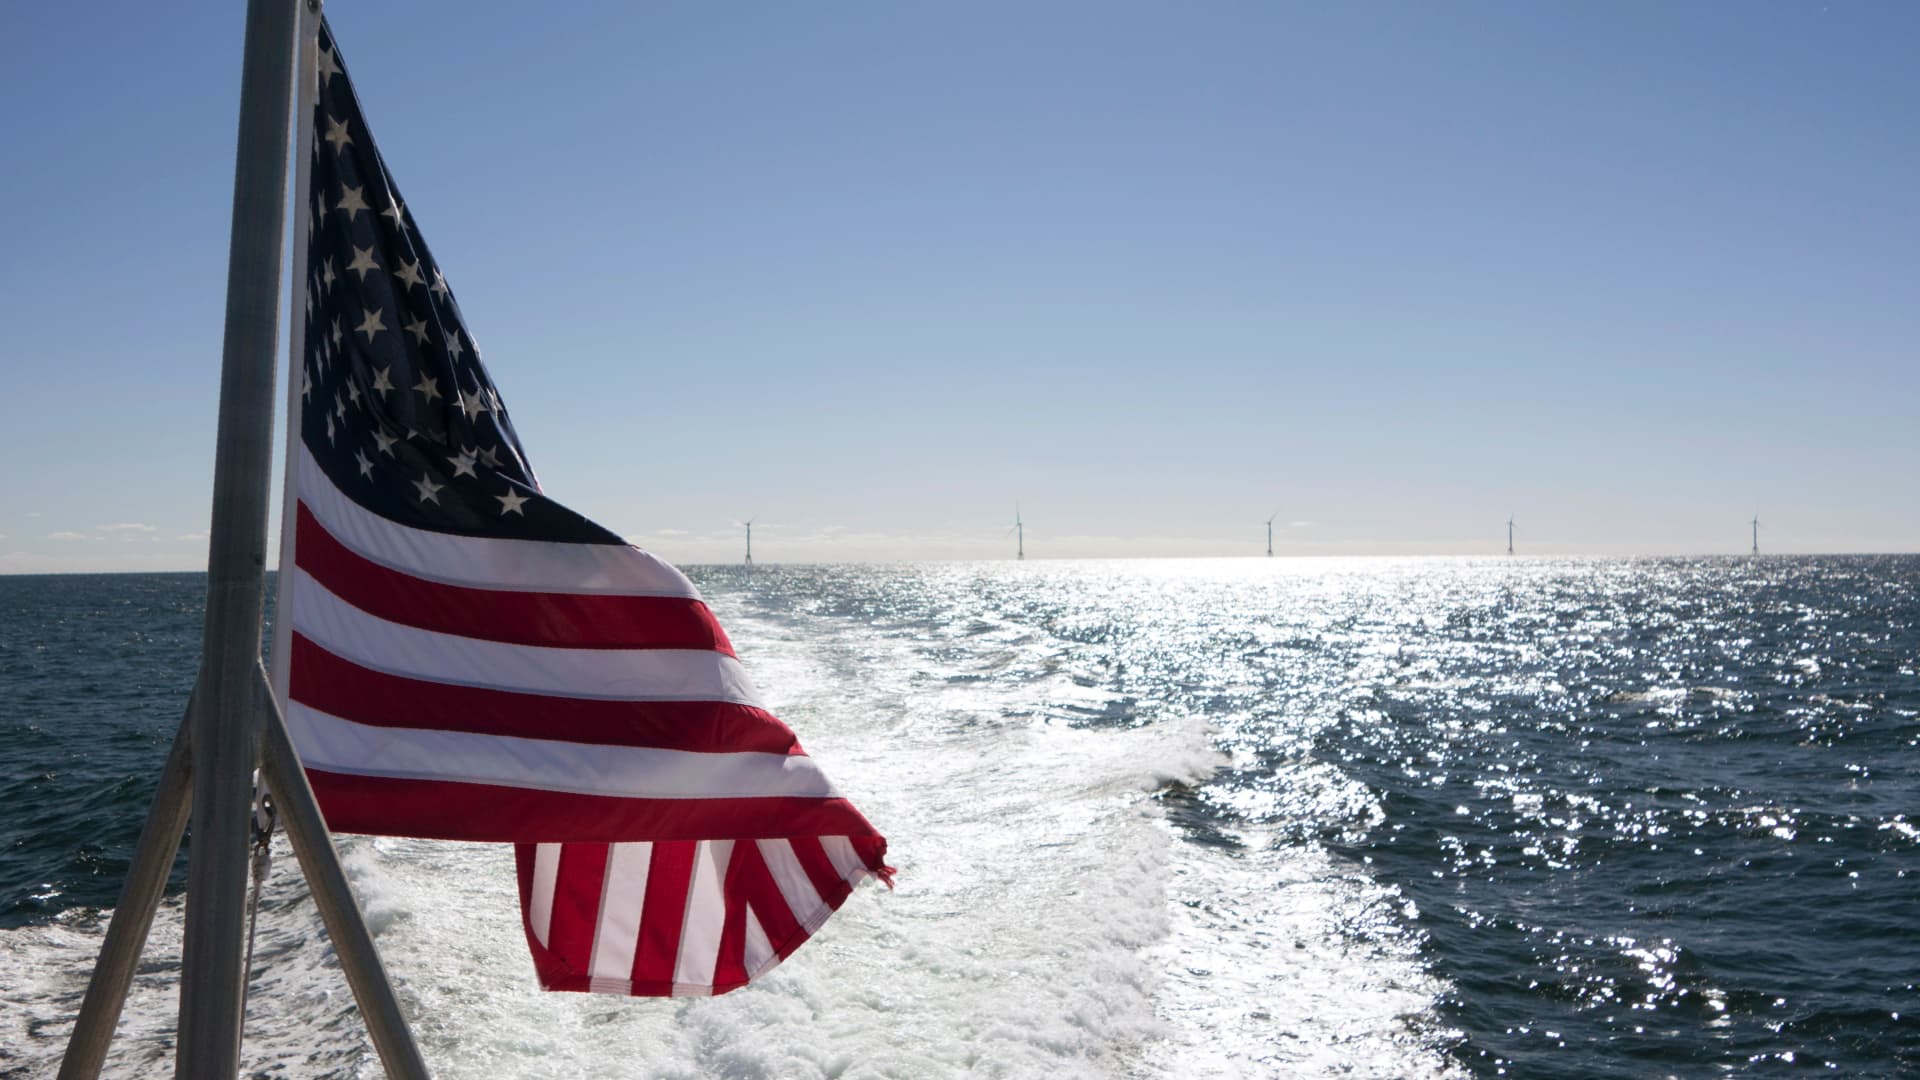 The U.S. looks to rival Europe and Asia with massive floating offshore wind plan